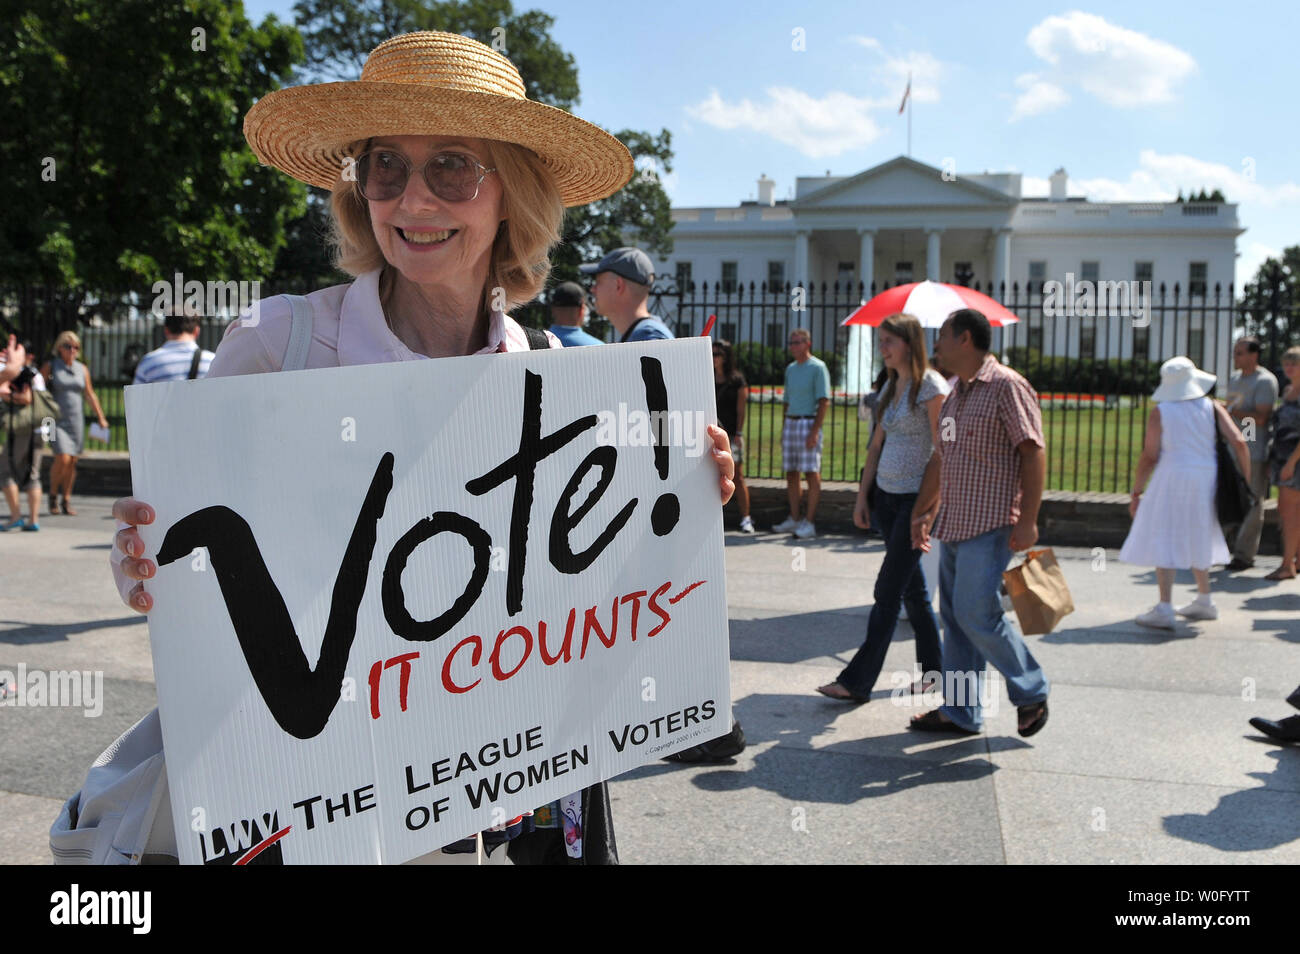 A member of the League of Women Voters participates in a demonstration to protest the lack of voting rights for the citizens of Washington, D.C., on the 90th Anniversary of the 19th Amendment, guaranteeing women the right to vote, in front of the White House in Washington on August 26, 2010.   UPI/Kevin Dietsch Stock Photo